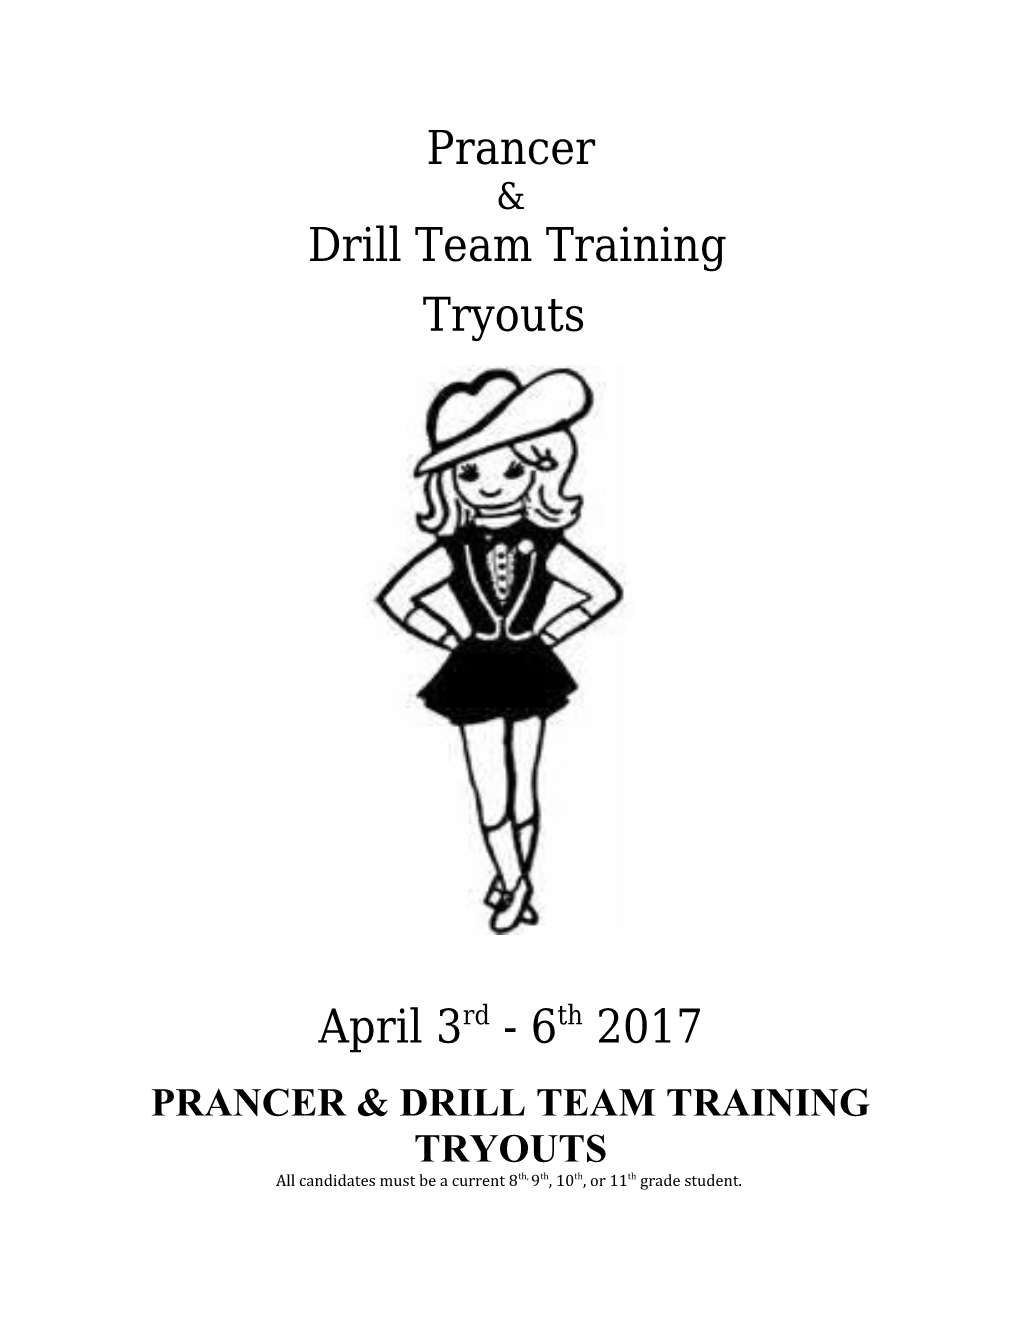 Prancer & Drill Team Training Tryouts